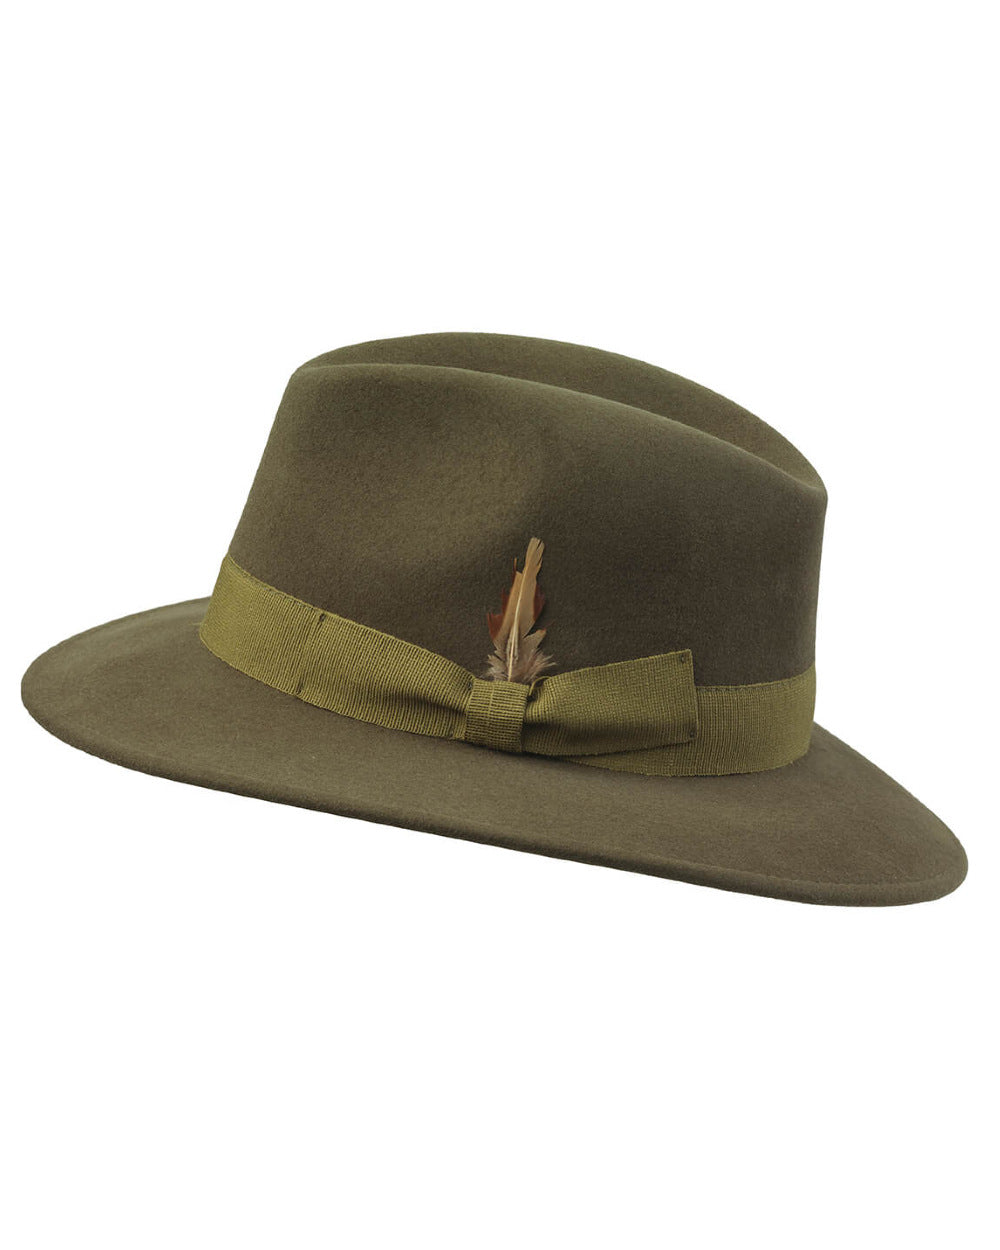 Loden Coloured Laksen Heritage Fedora Cashmere Hat On A White Background 